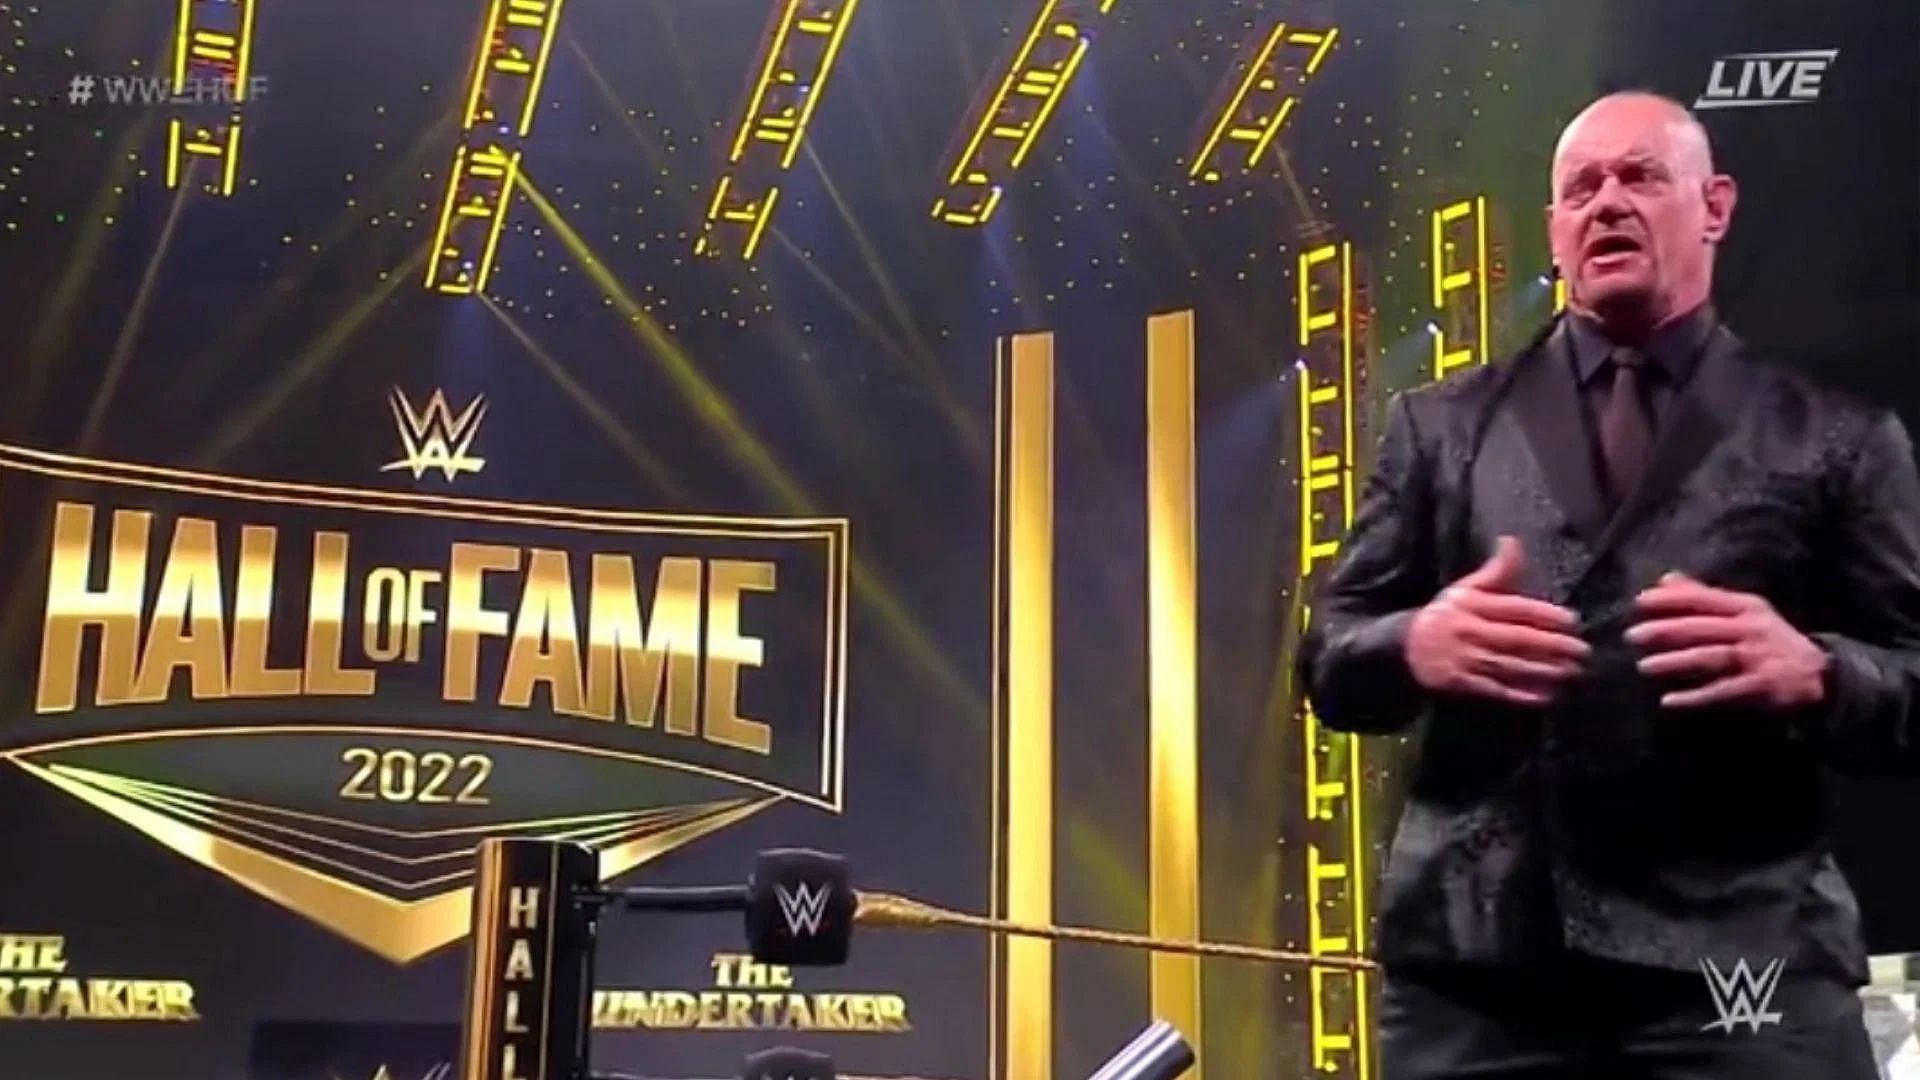 The Undertaker during his WWE Hall of Fame speech.